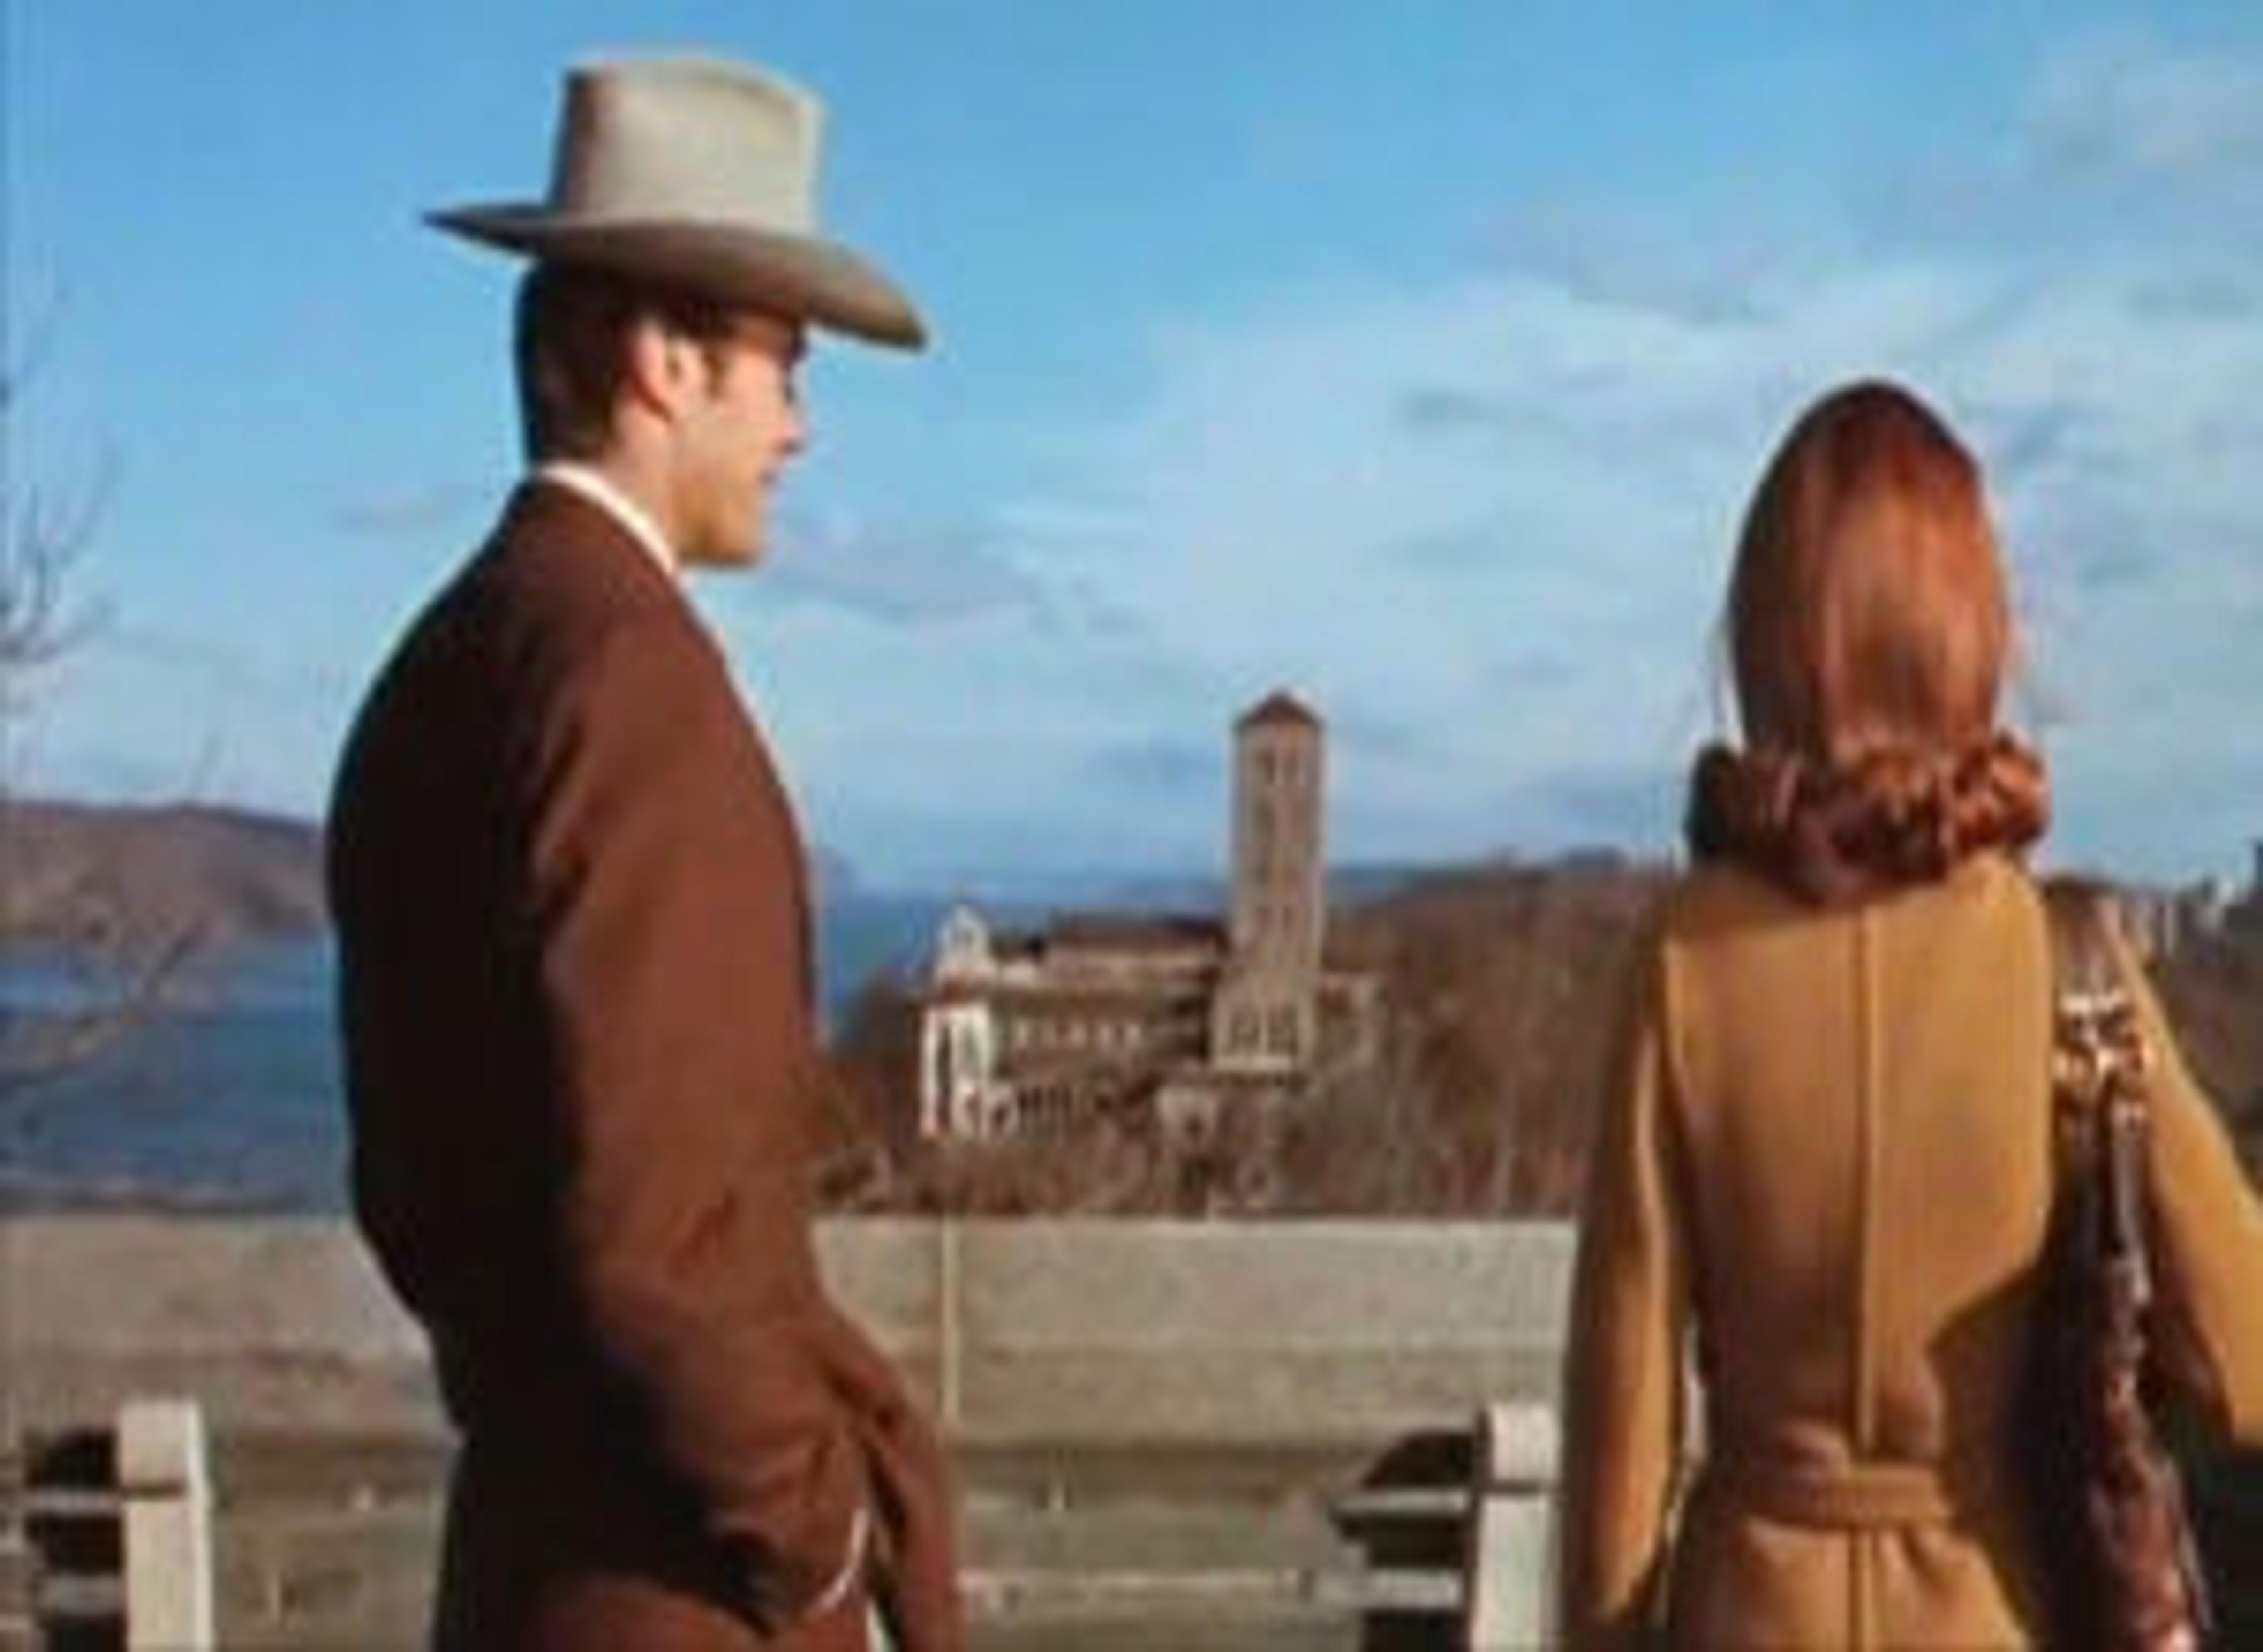 Clint Eastwood and Susan Clark take in the view of The Cloisters from the Linden Terrace of Fort Tryon Park in the 1968 film Coogan's Bluff.